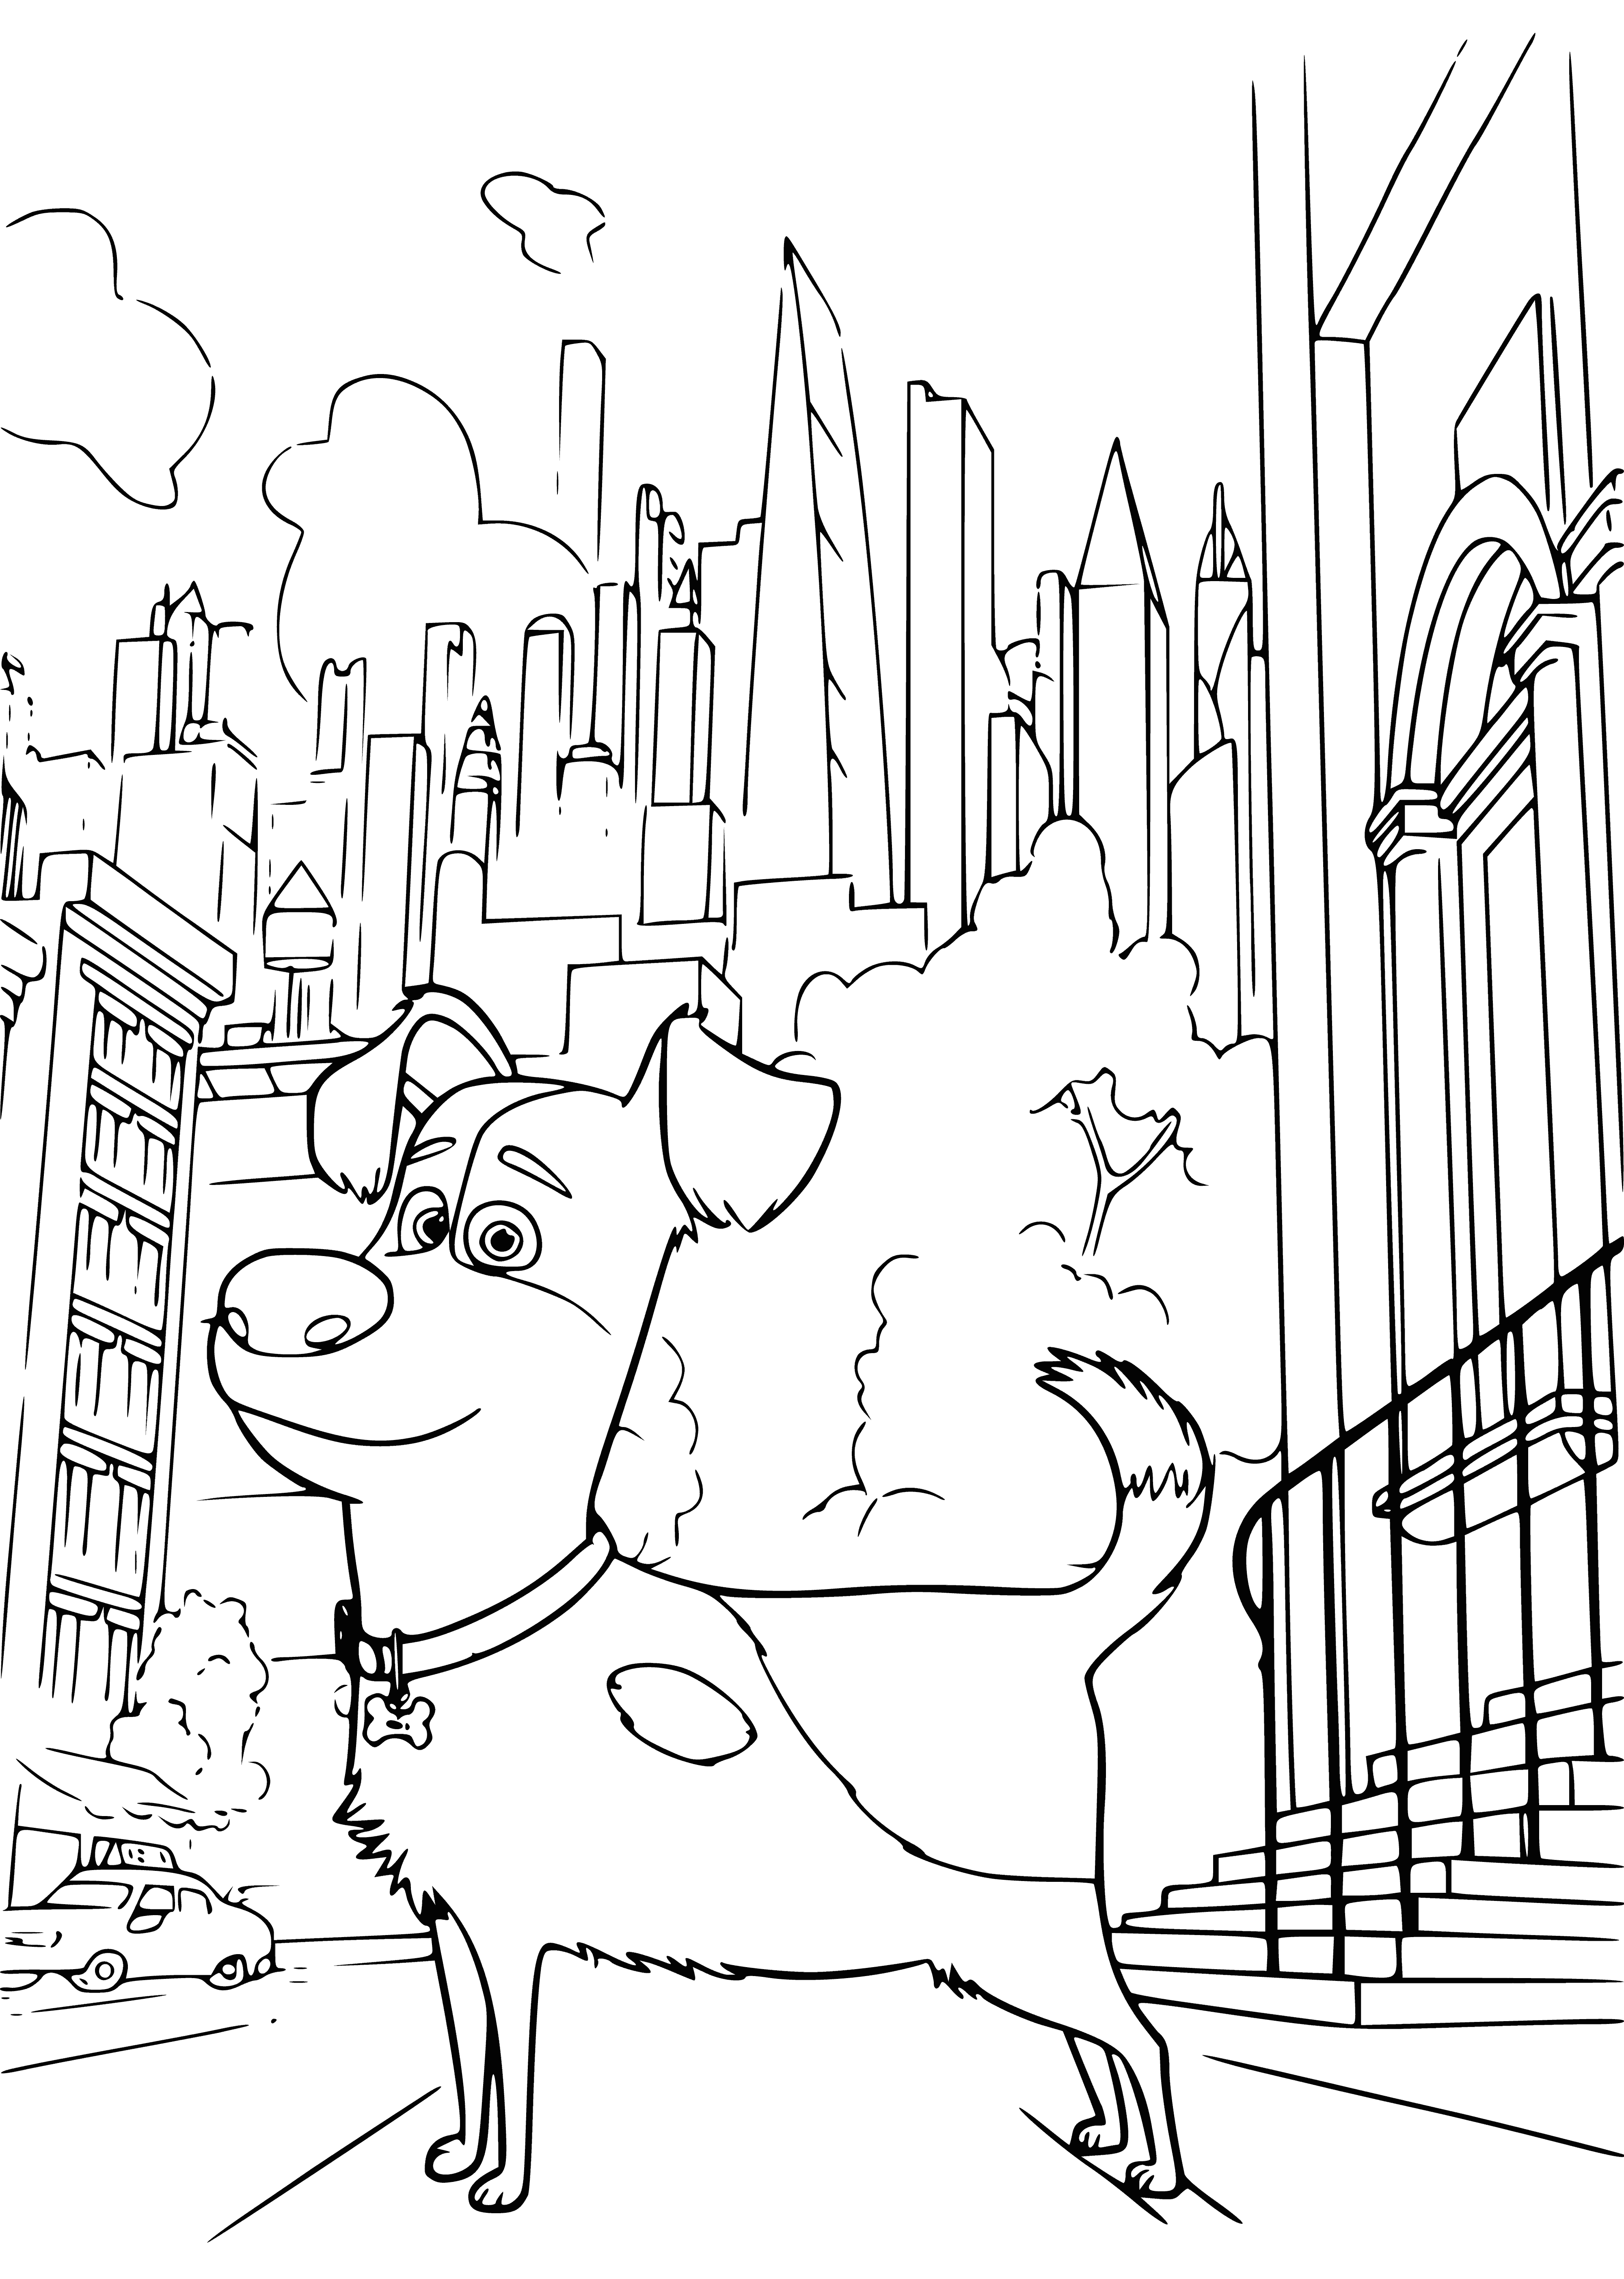 Max on the street coloring page